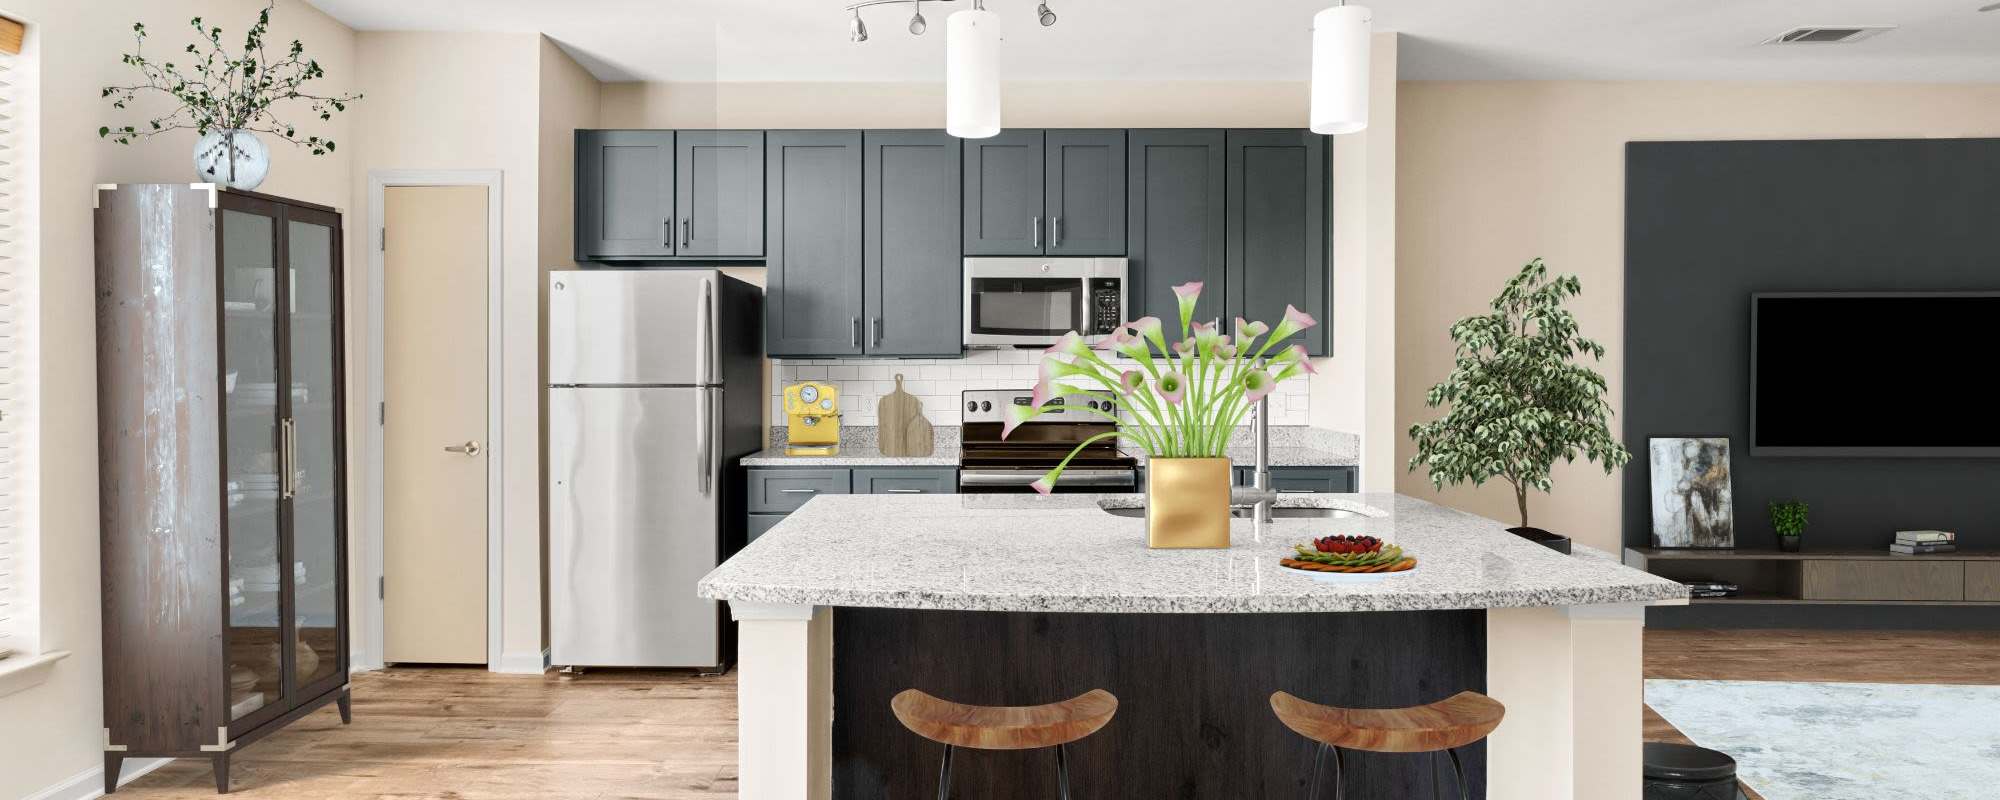 Rendering of kitchen at Lofts at Capricorn in Macon, Georgia